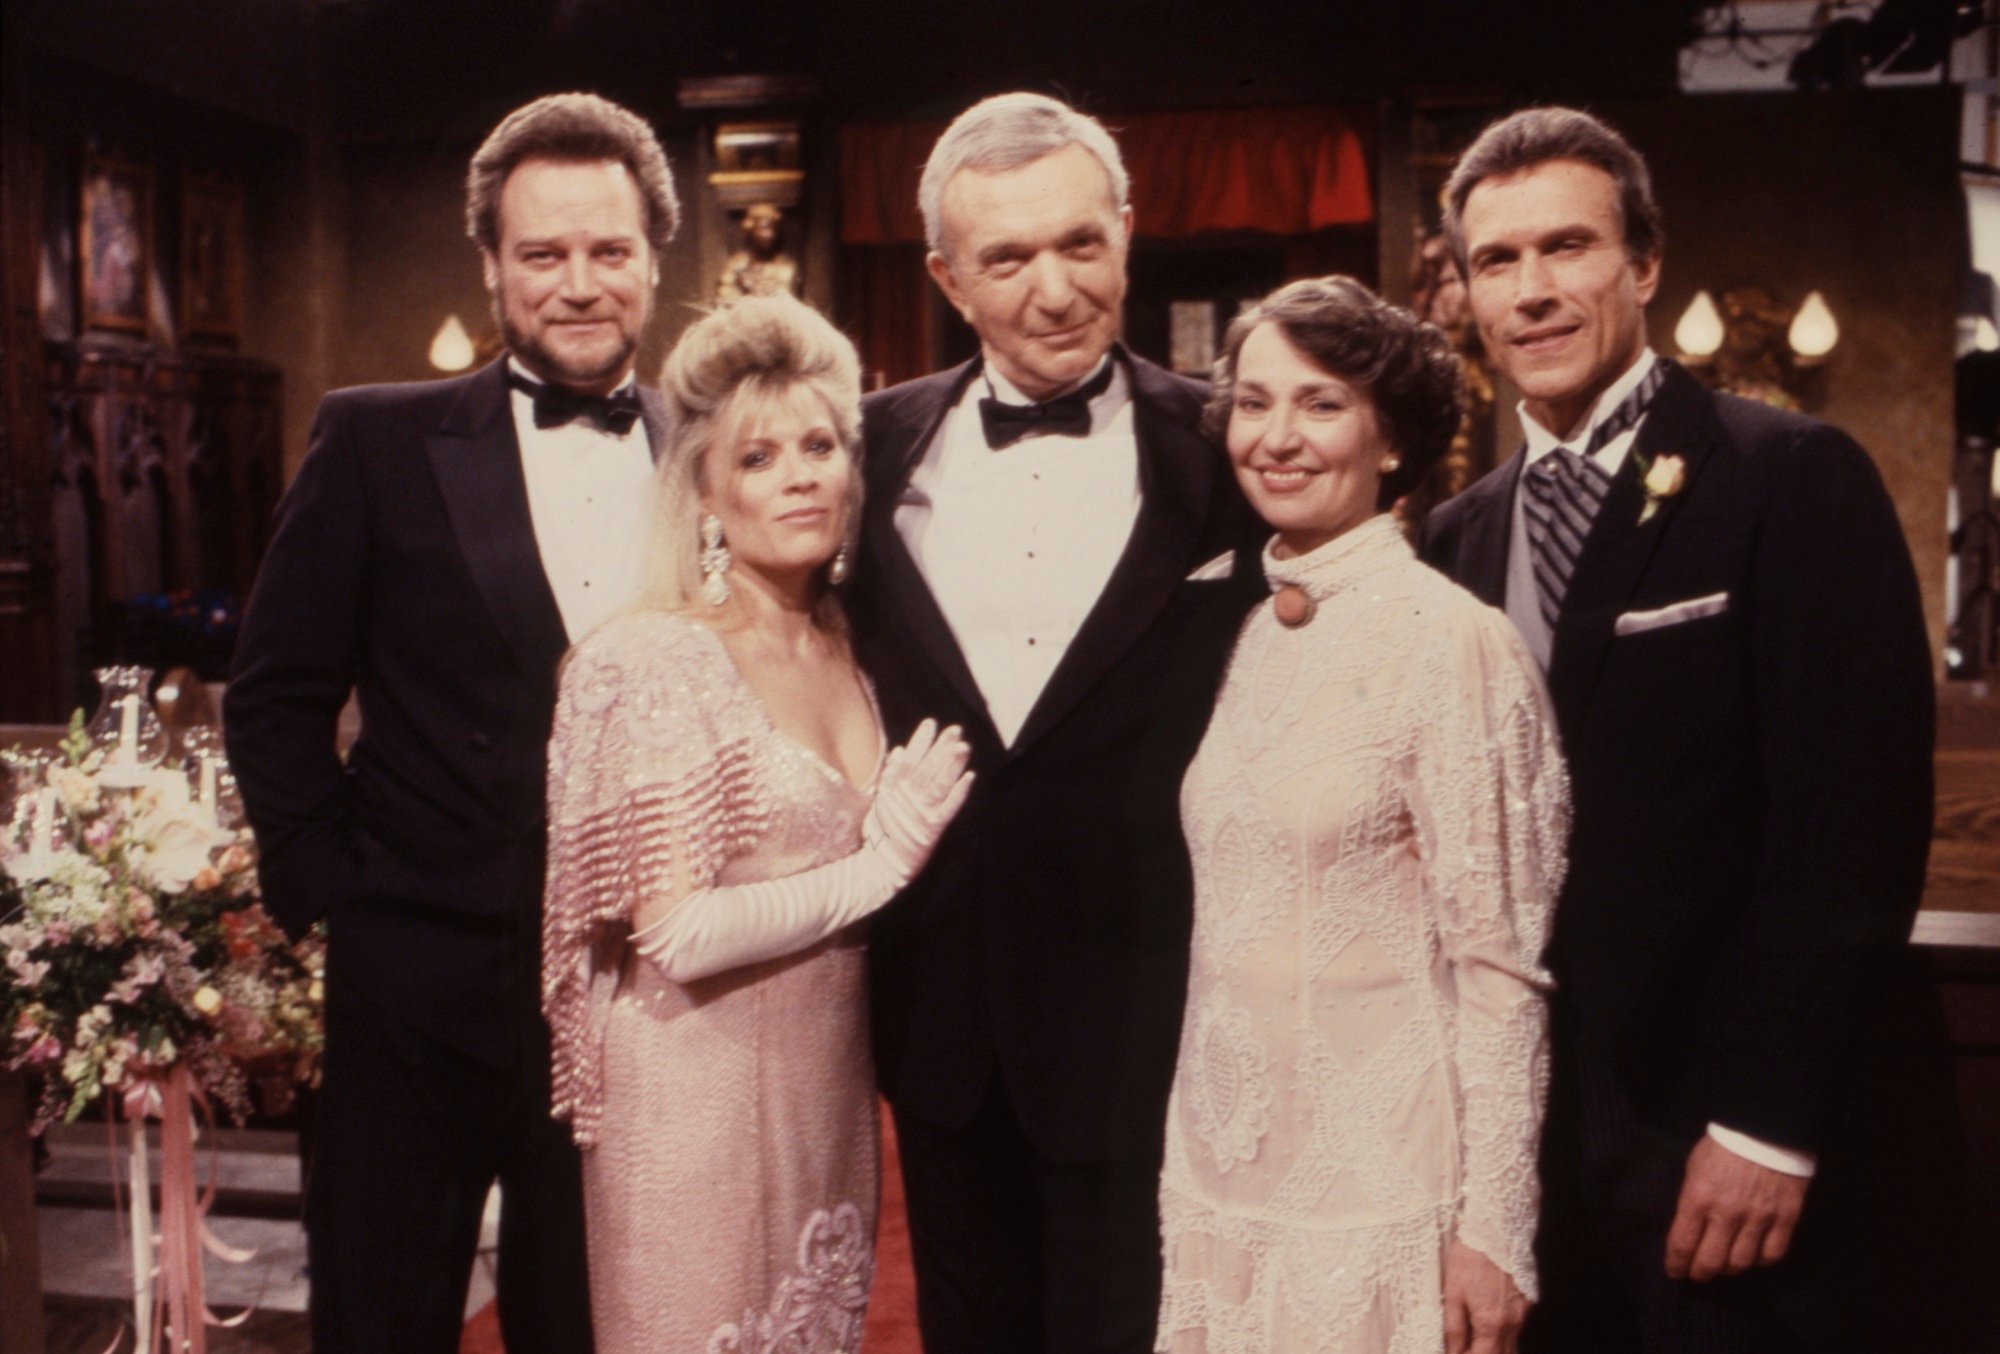 Soap opera cast of Ryan's Hope in a 1989 photo